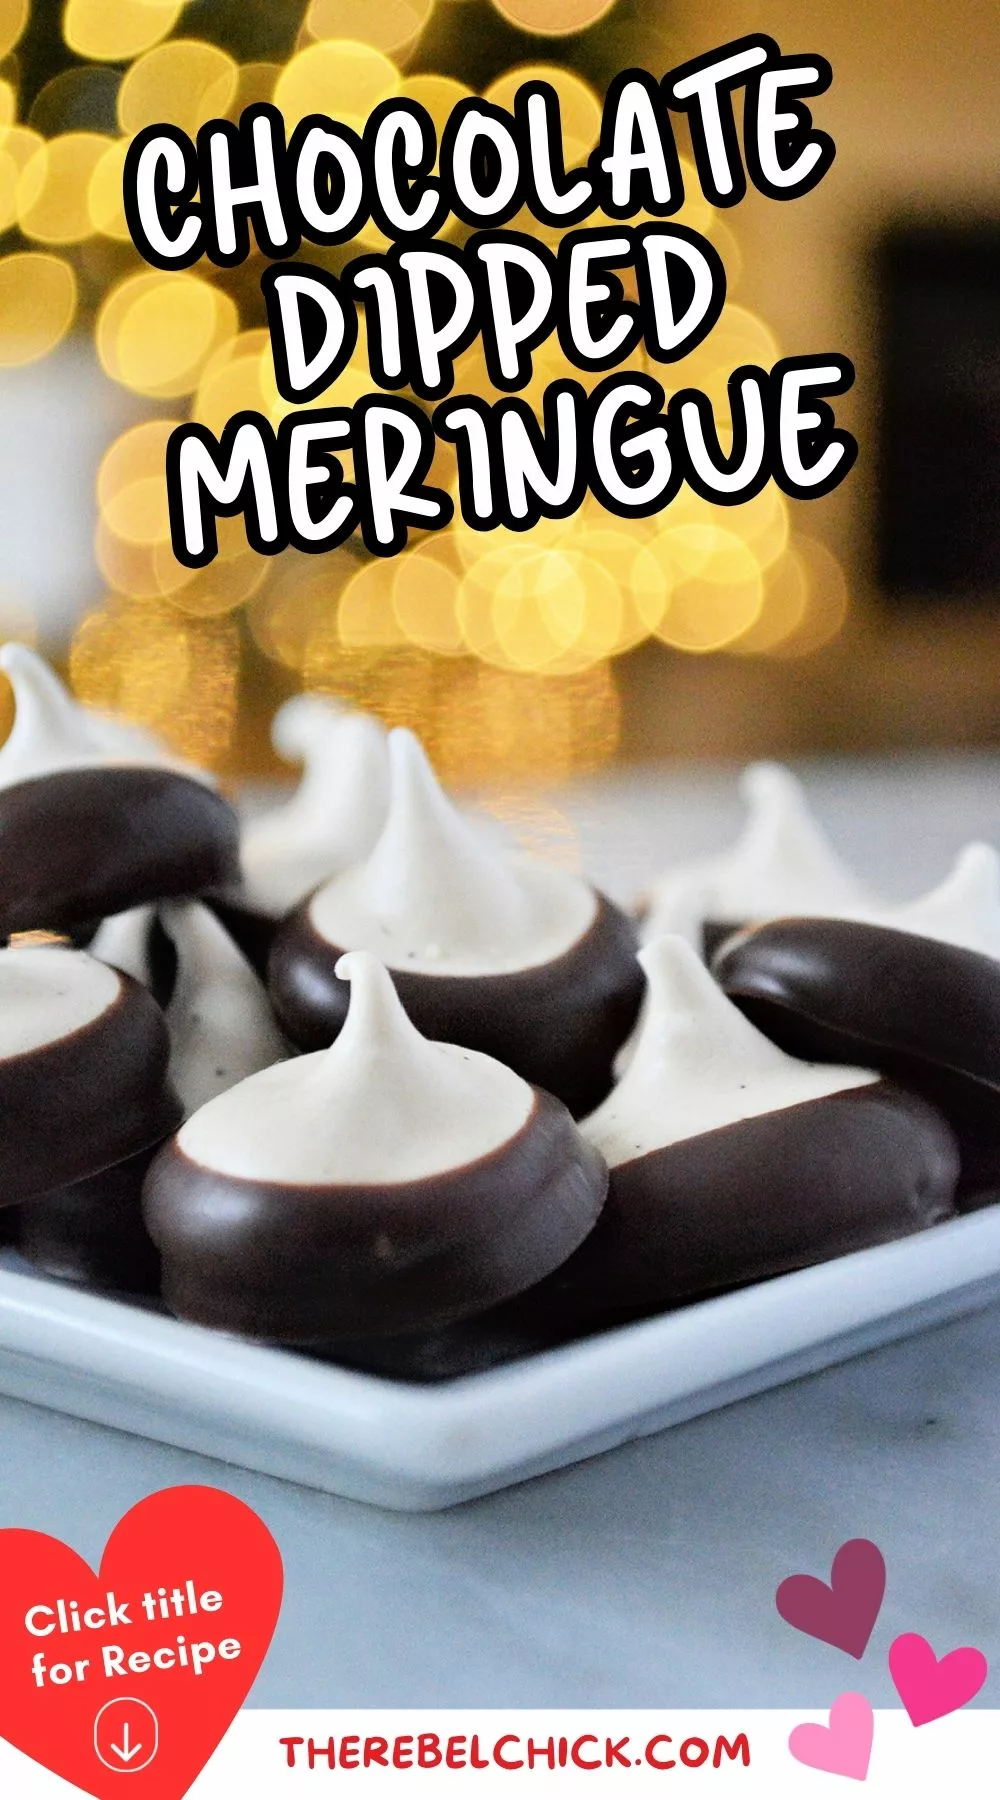 Chocolate Dipped Meringues on a plate